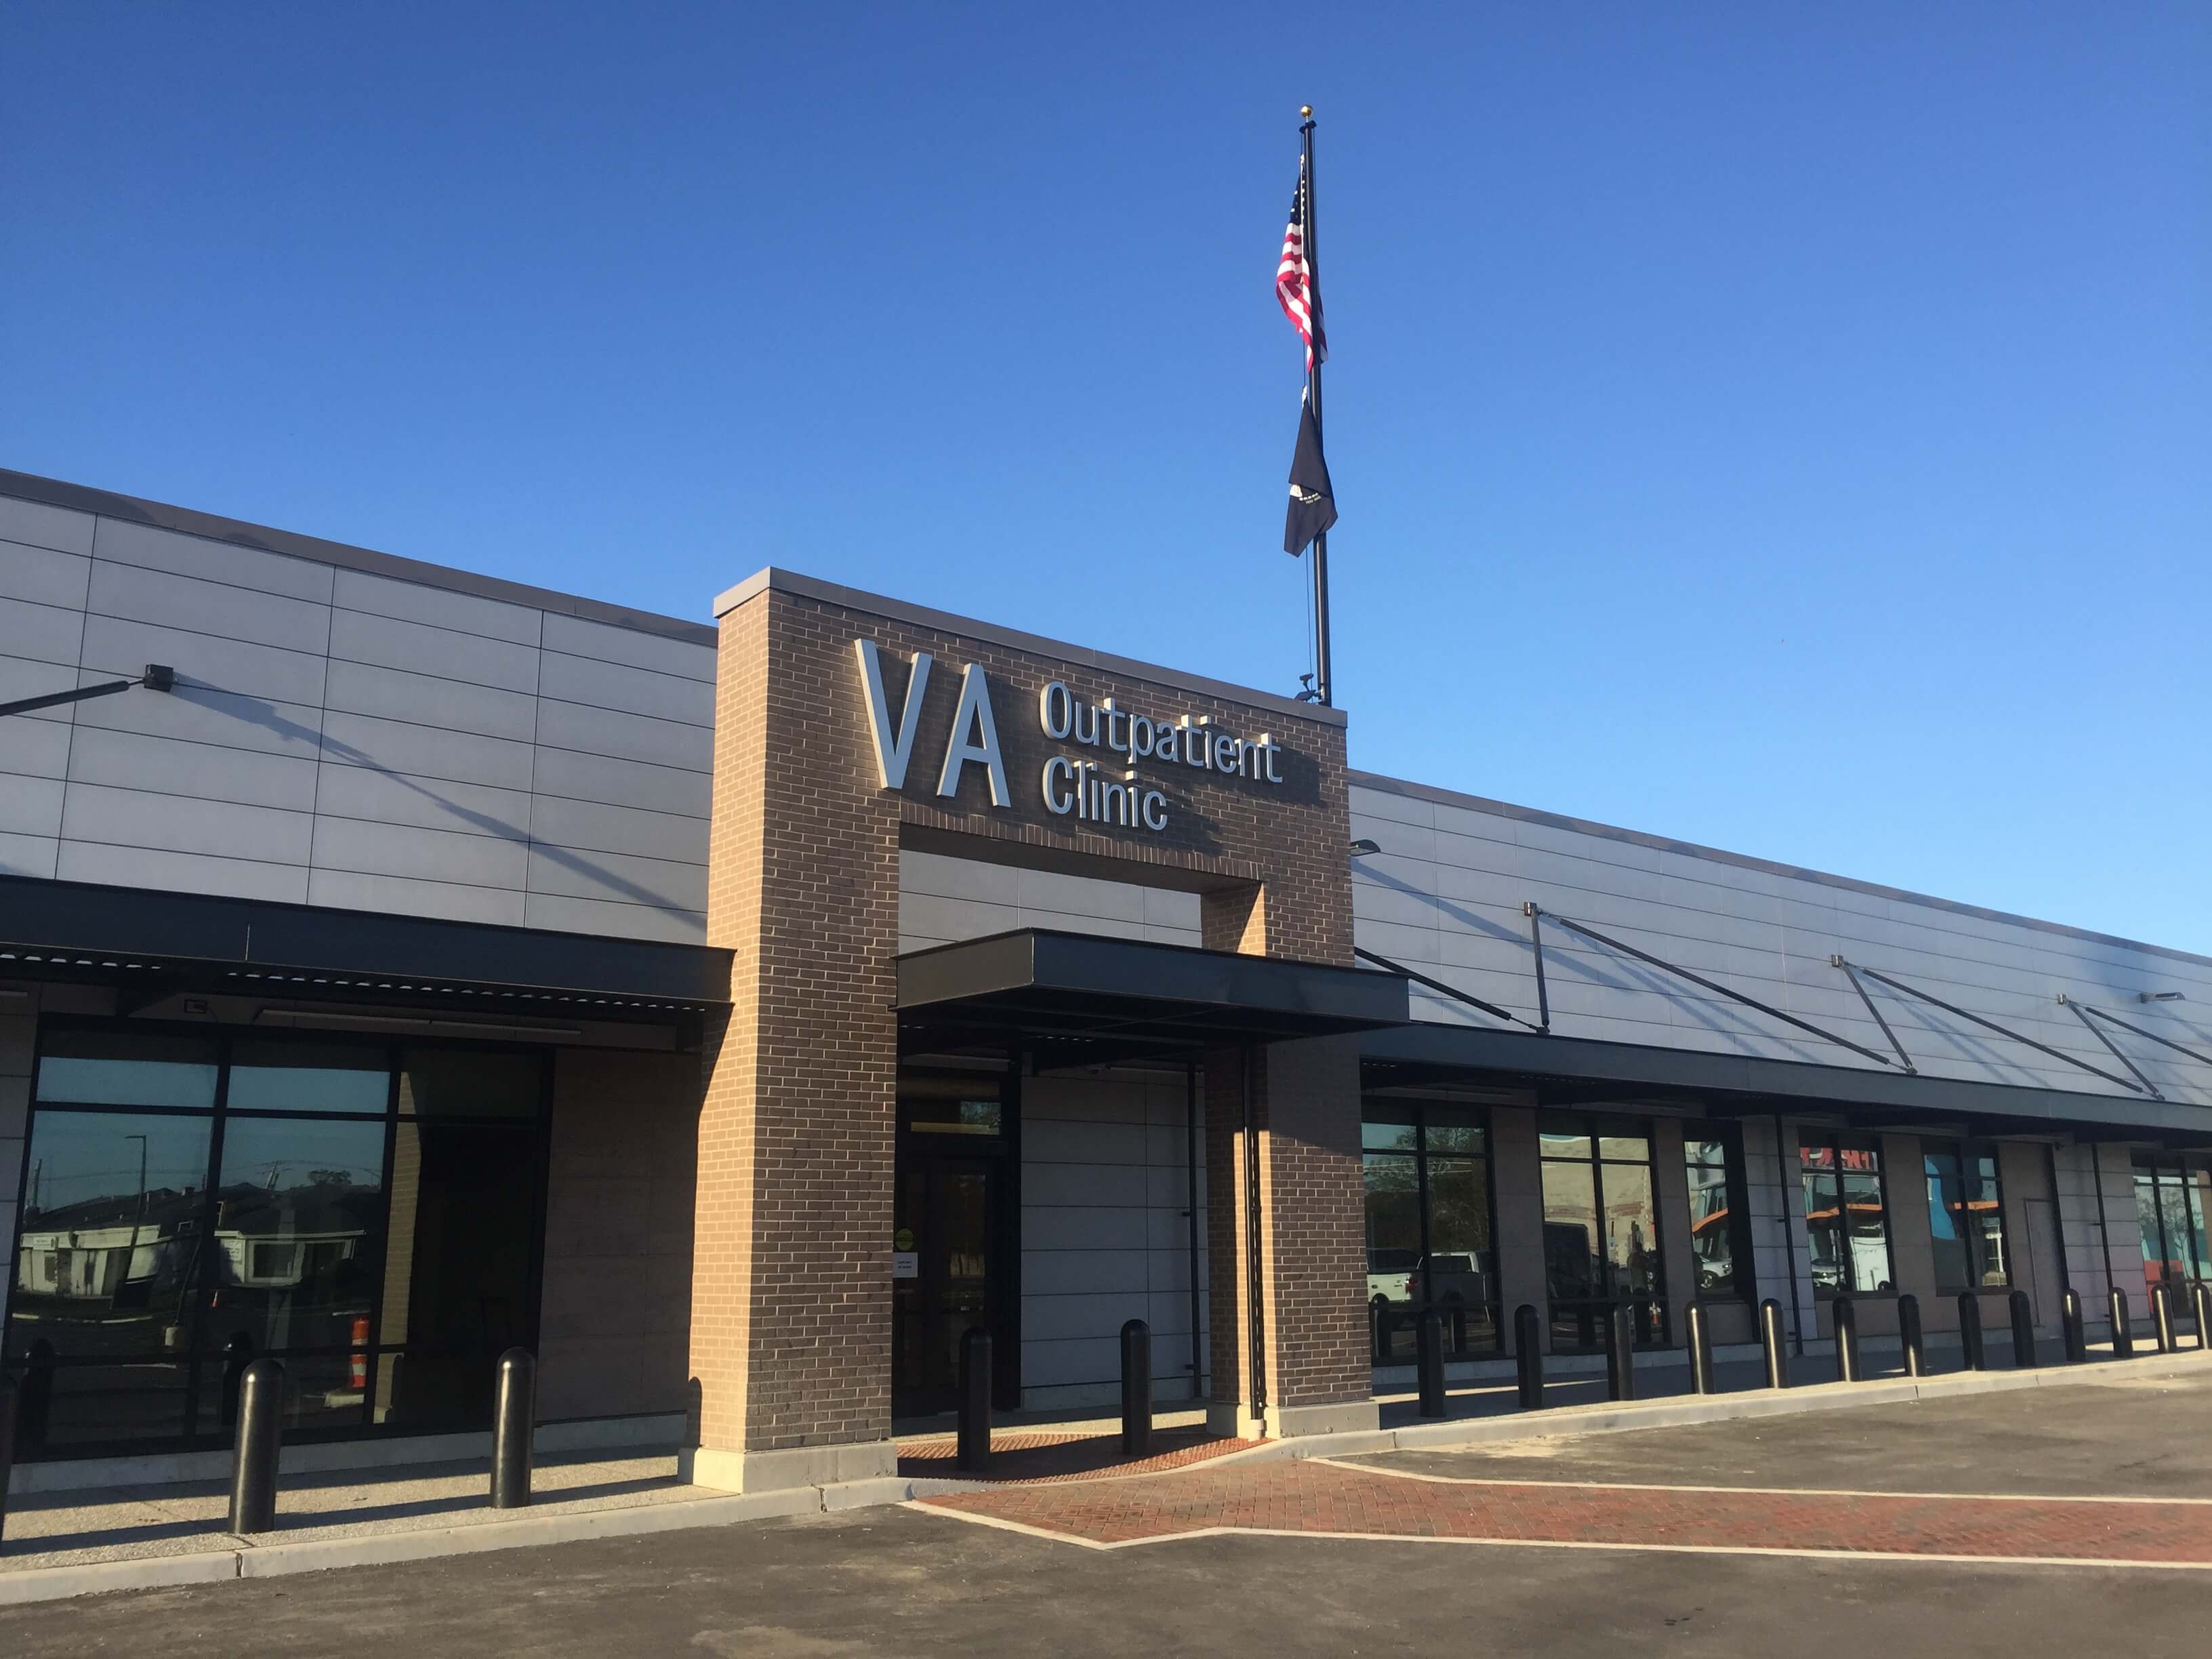 Vets will be able to have their eyes examined at the new VA Clinic